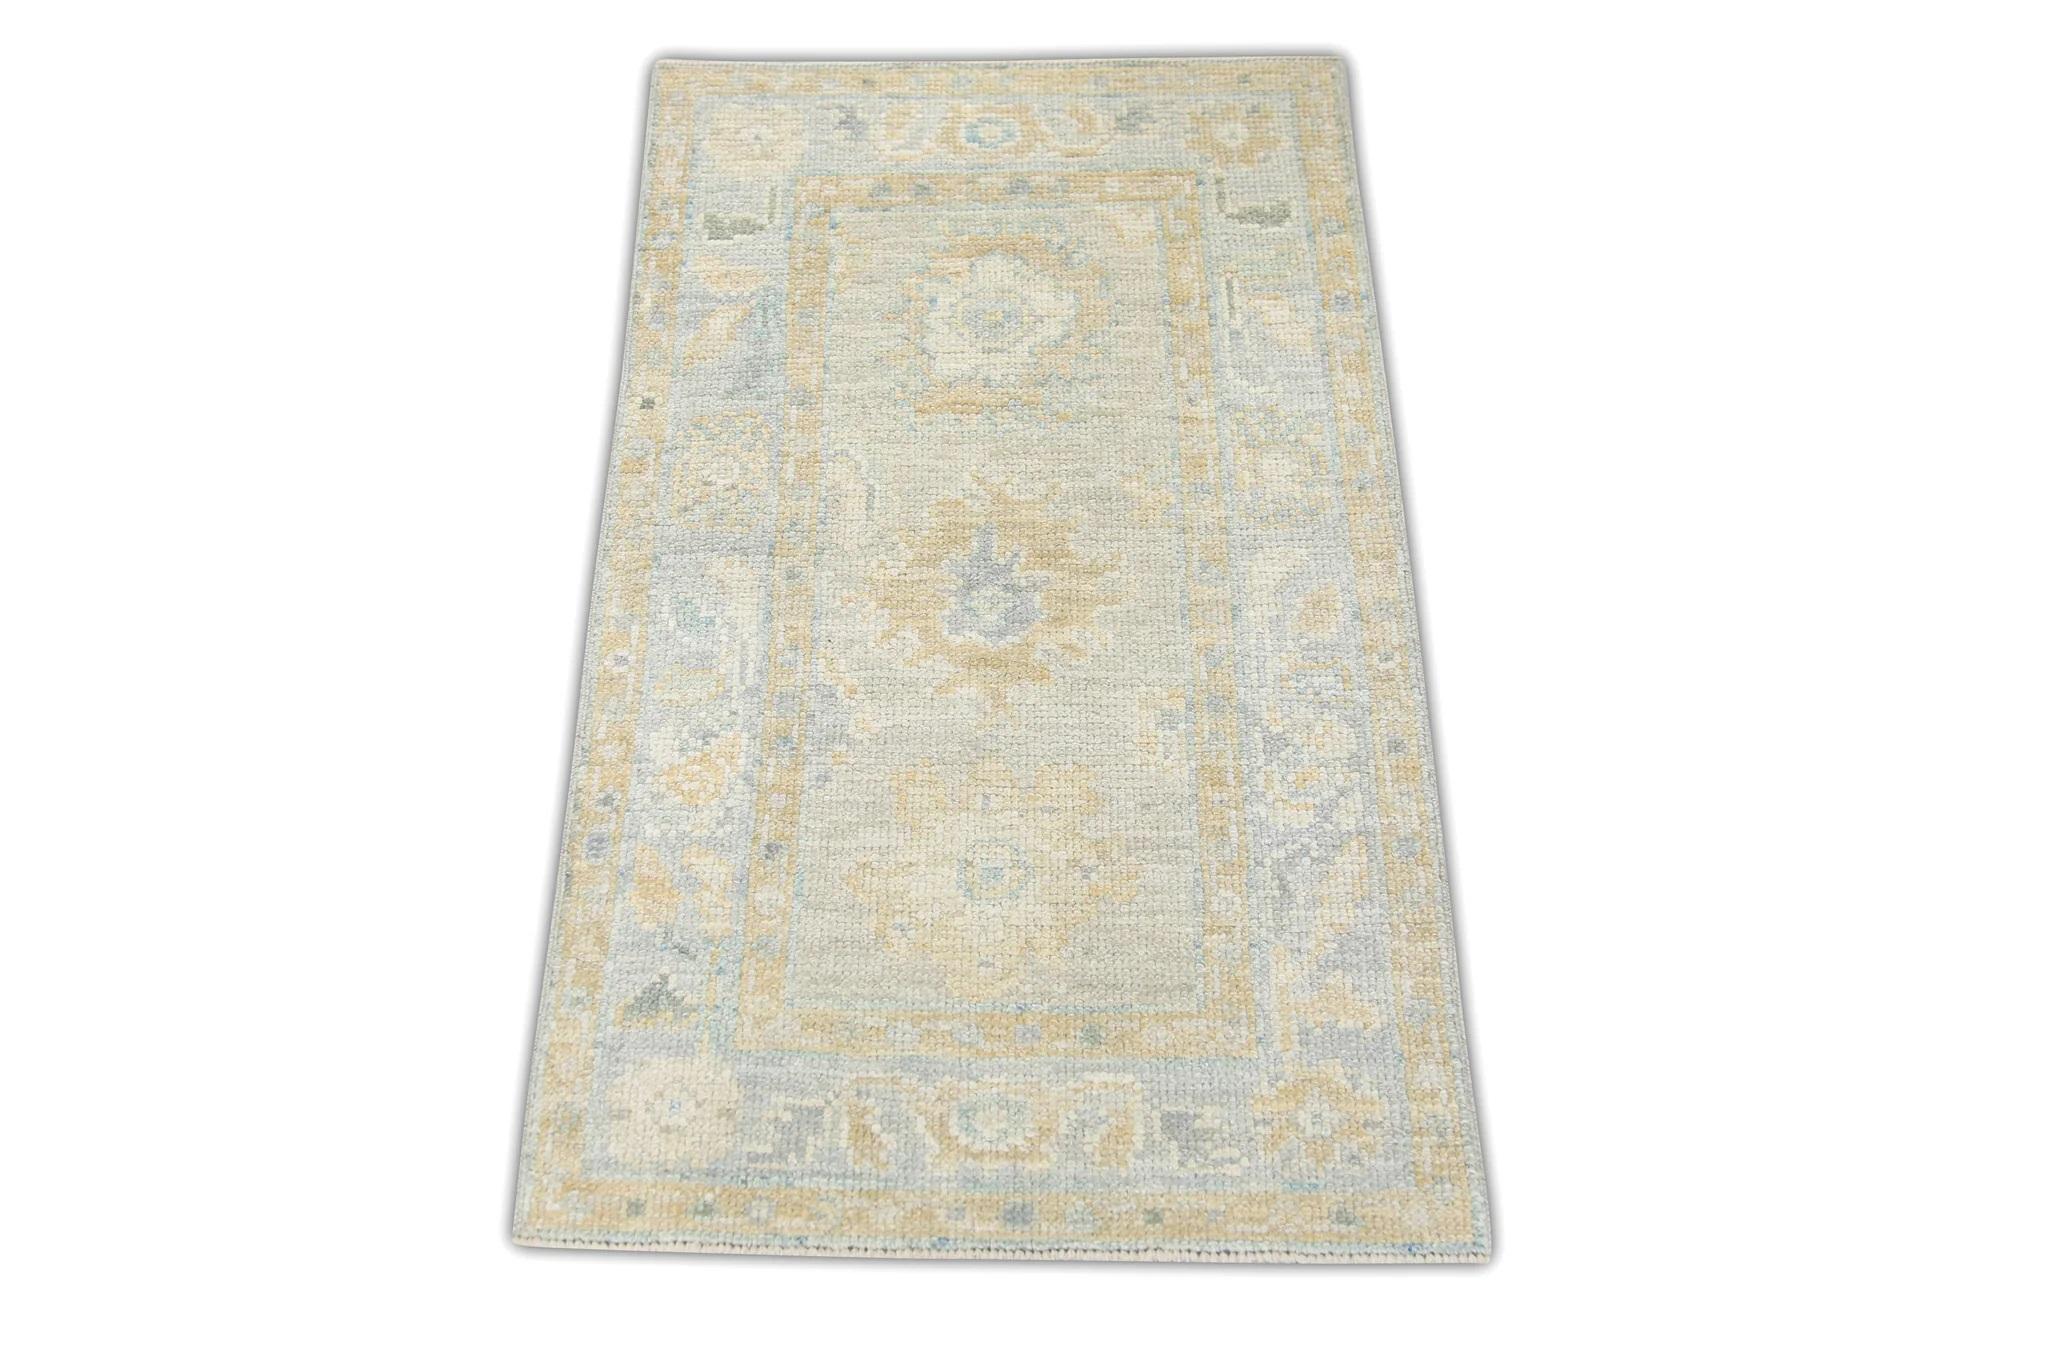 Green and Blue Floral Design Handwoven Wool Turkish Oushak Rug 1'11